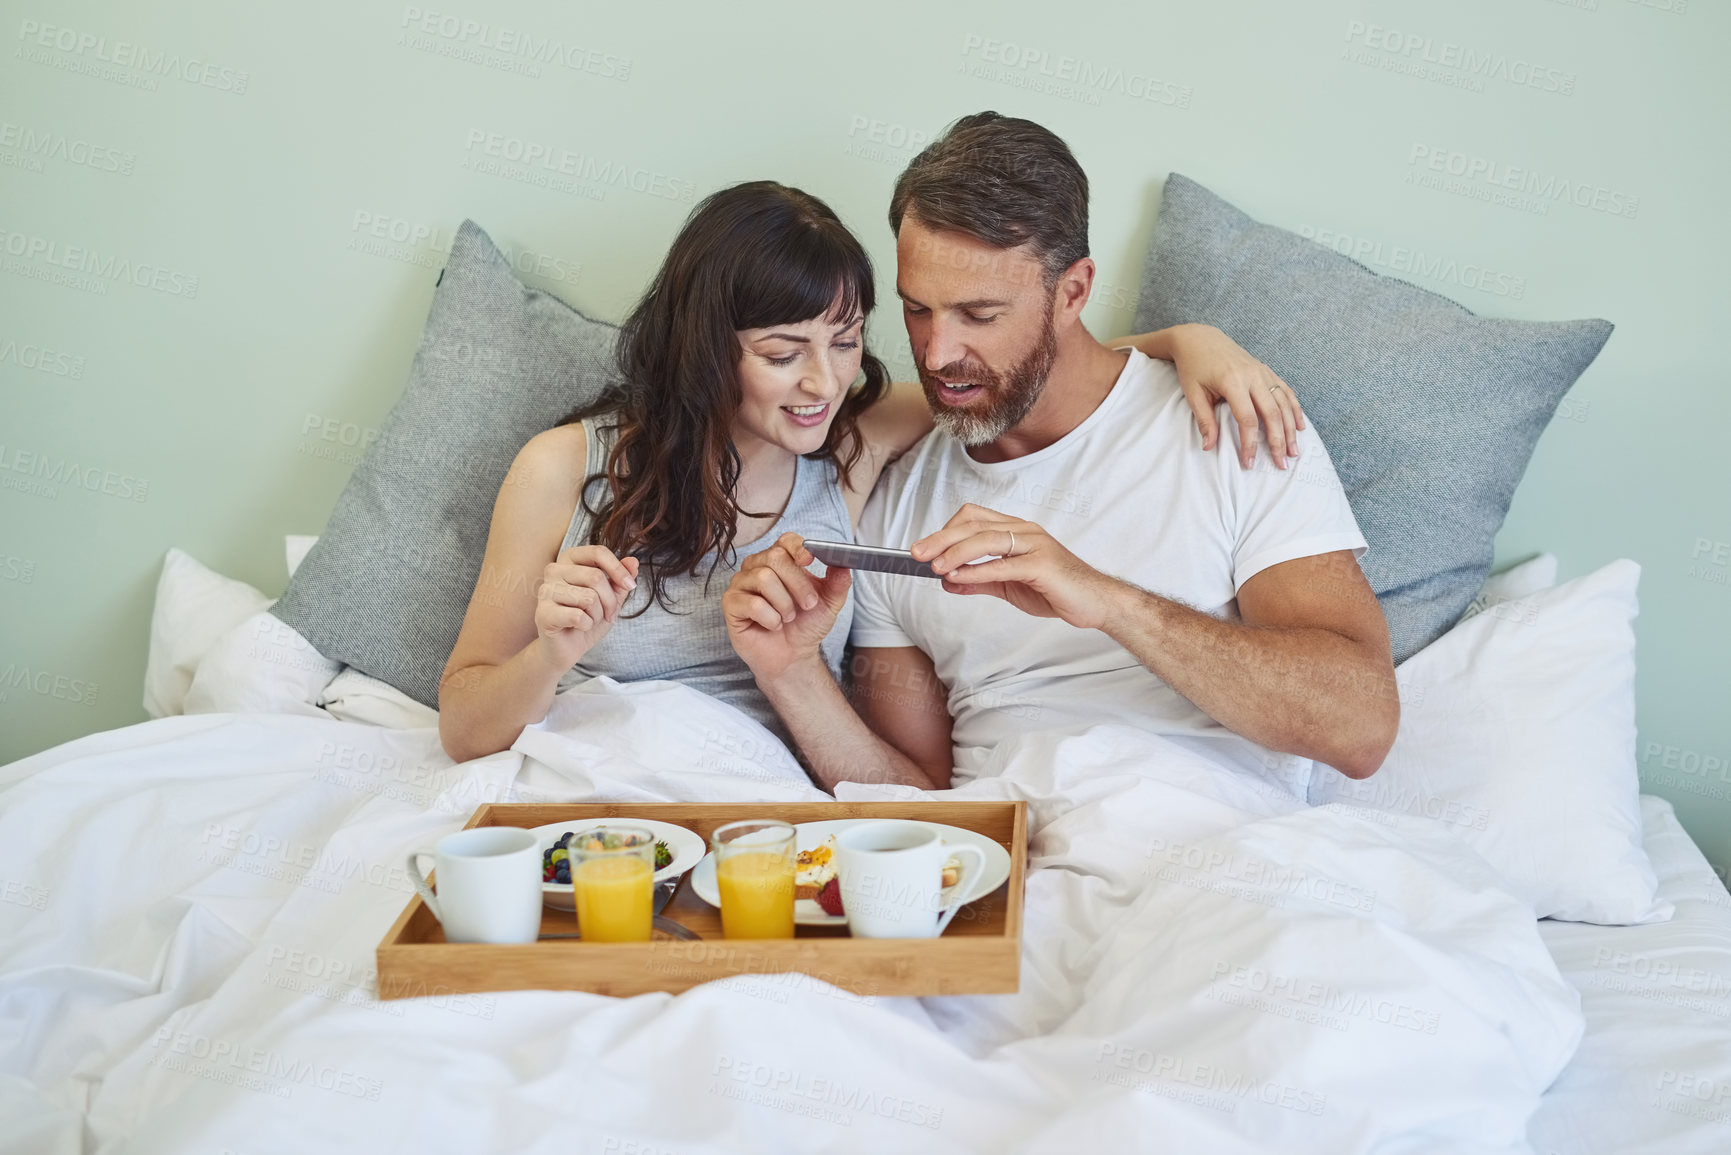 Buy stock photo Shot of a cheerful young couple sitting in bed while enjoying breakfast together and taking a picture during morning hours